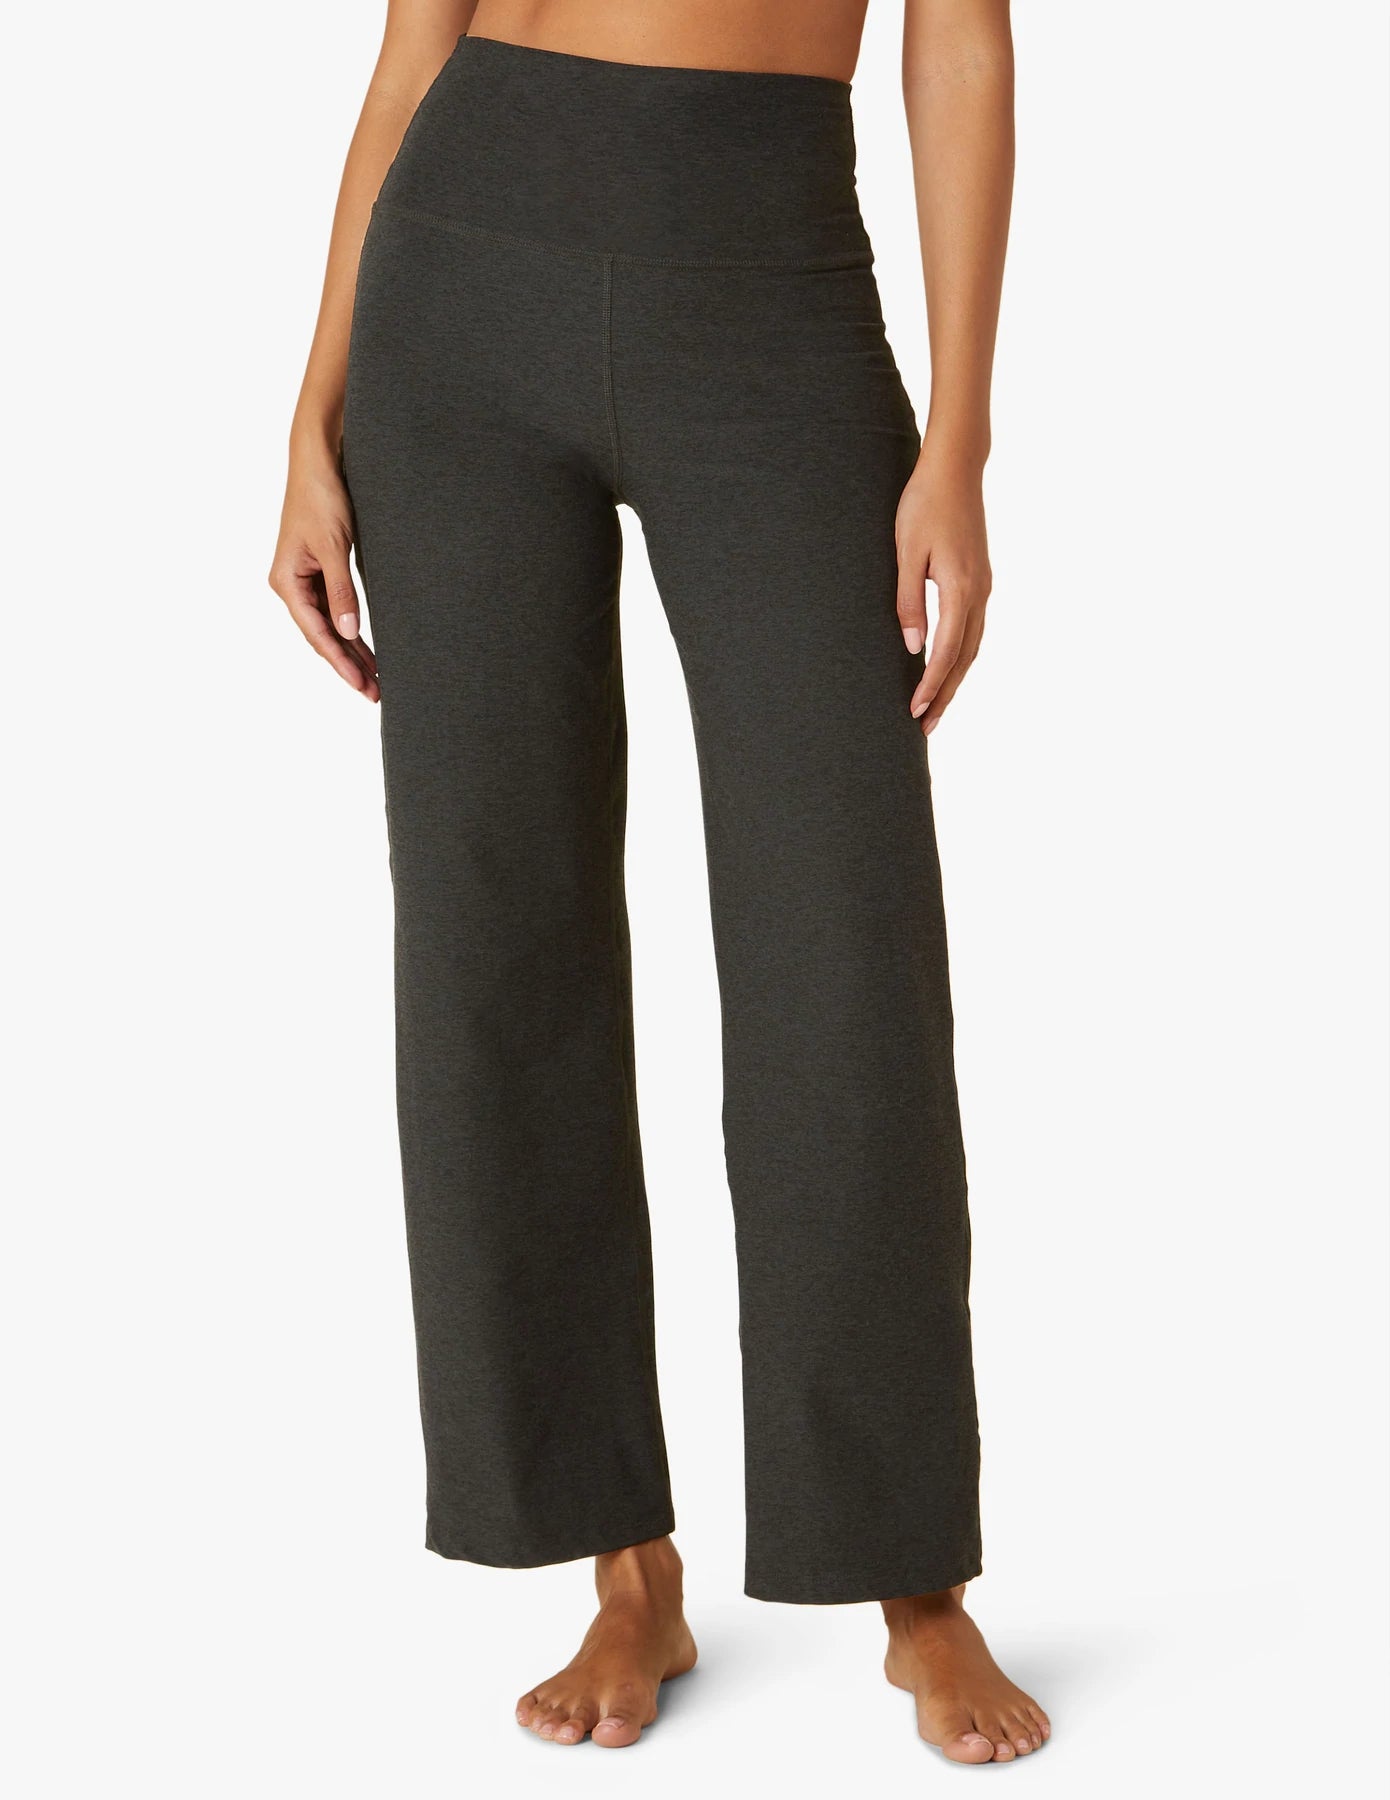 There's no limits to where the Limitless High Waisted Straight Leg Pants can go: the office, the gym, and even out to dinner. Classic straight leg design gives a timeless style sense, while all over softness and breathability make these pants a closet essential. Beyond Yoga's bestselling high waist band ensures they compliment your shape as much as they comfort you.